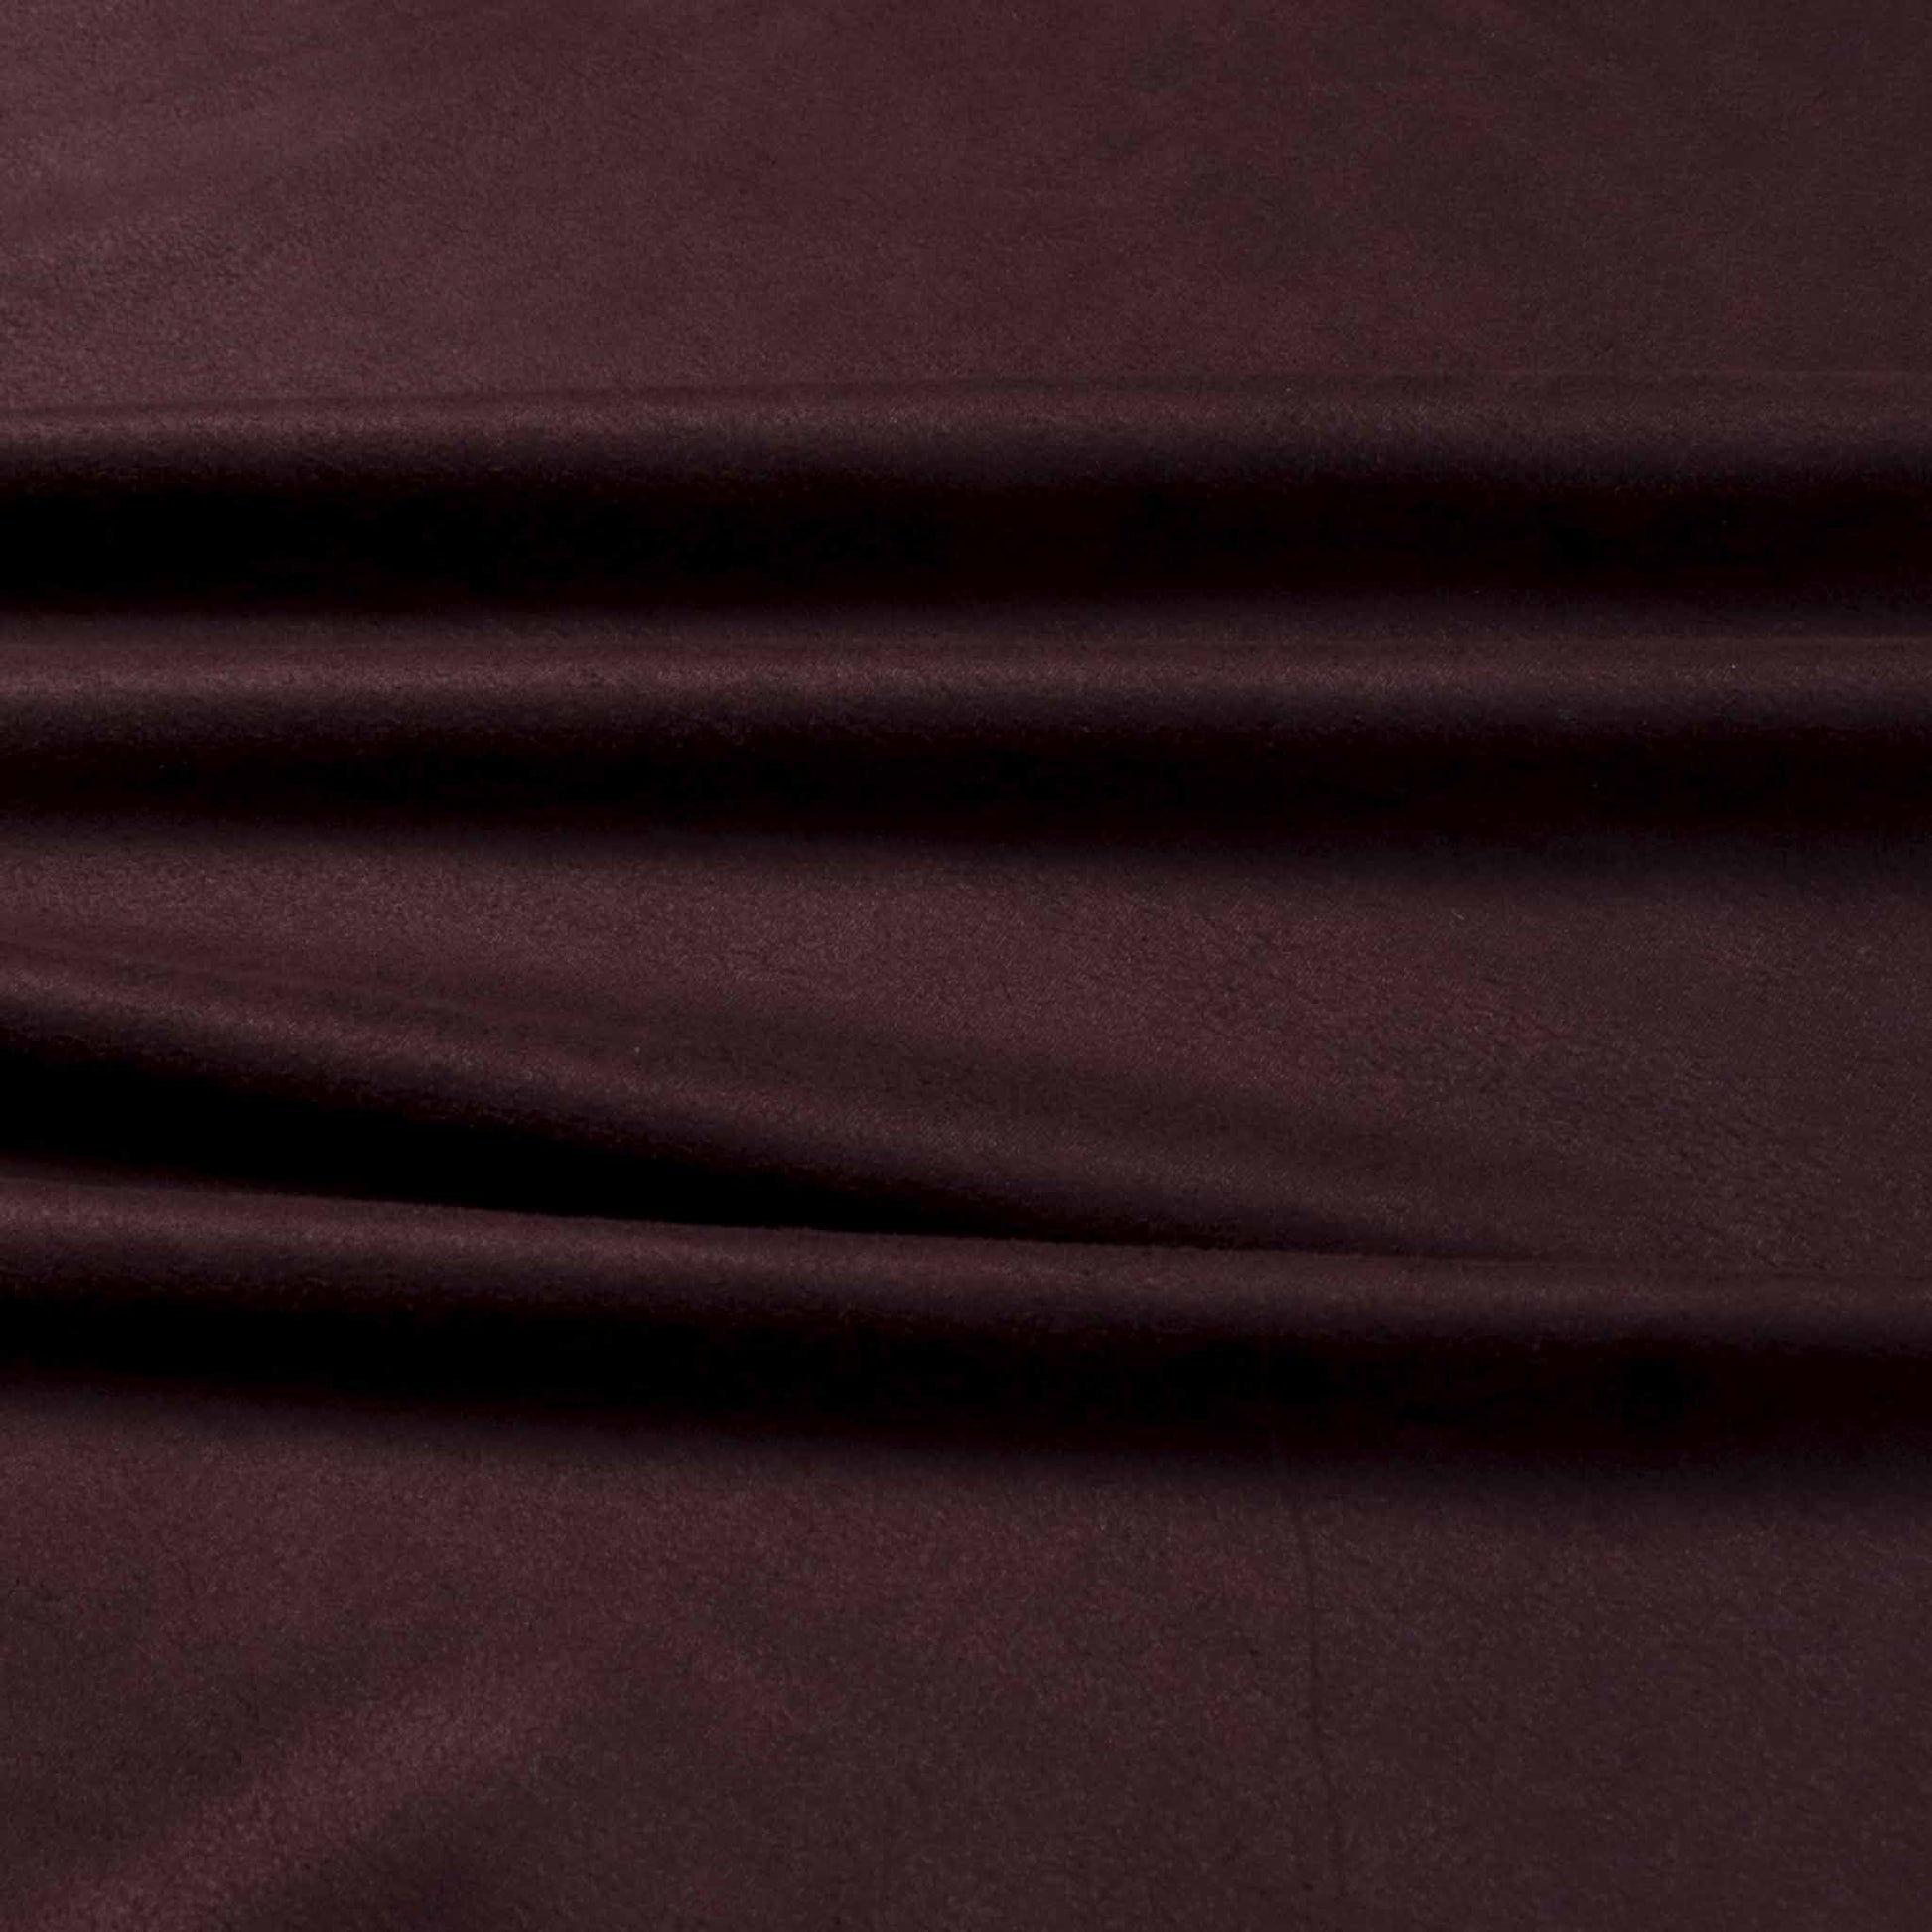 plum purple faux suede fabric for dressmaking with stretch